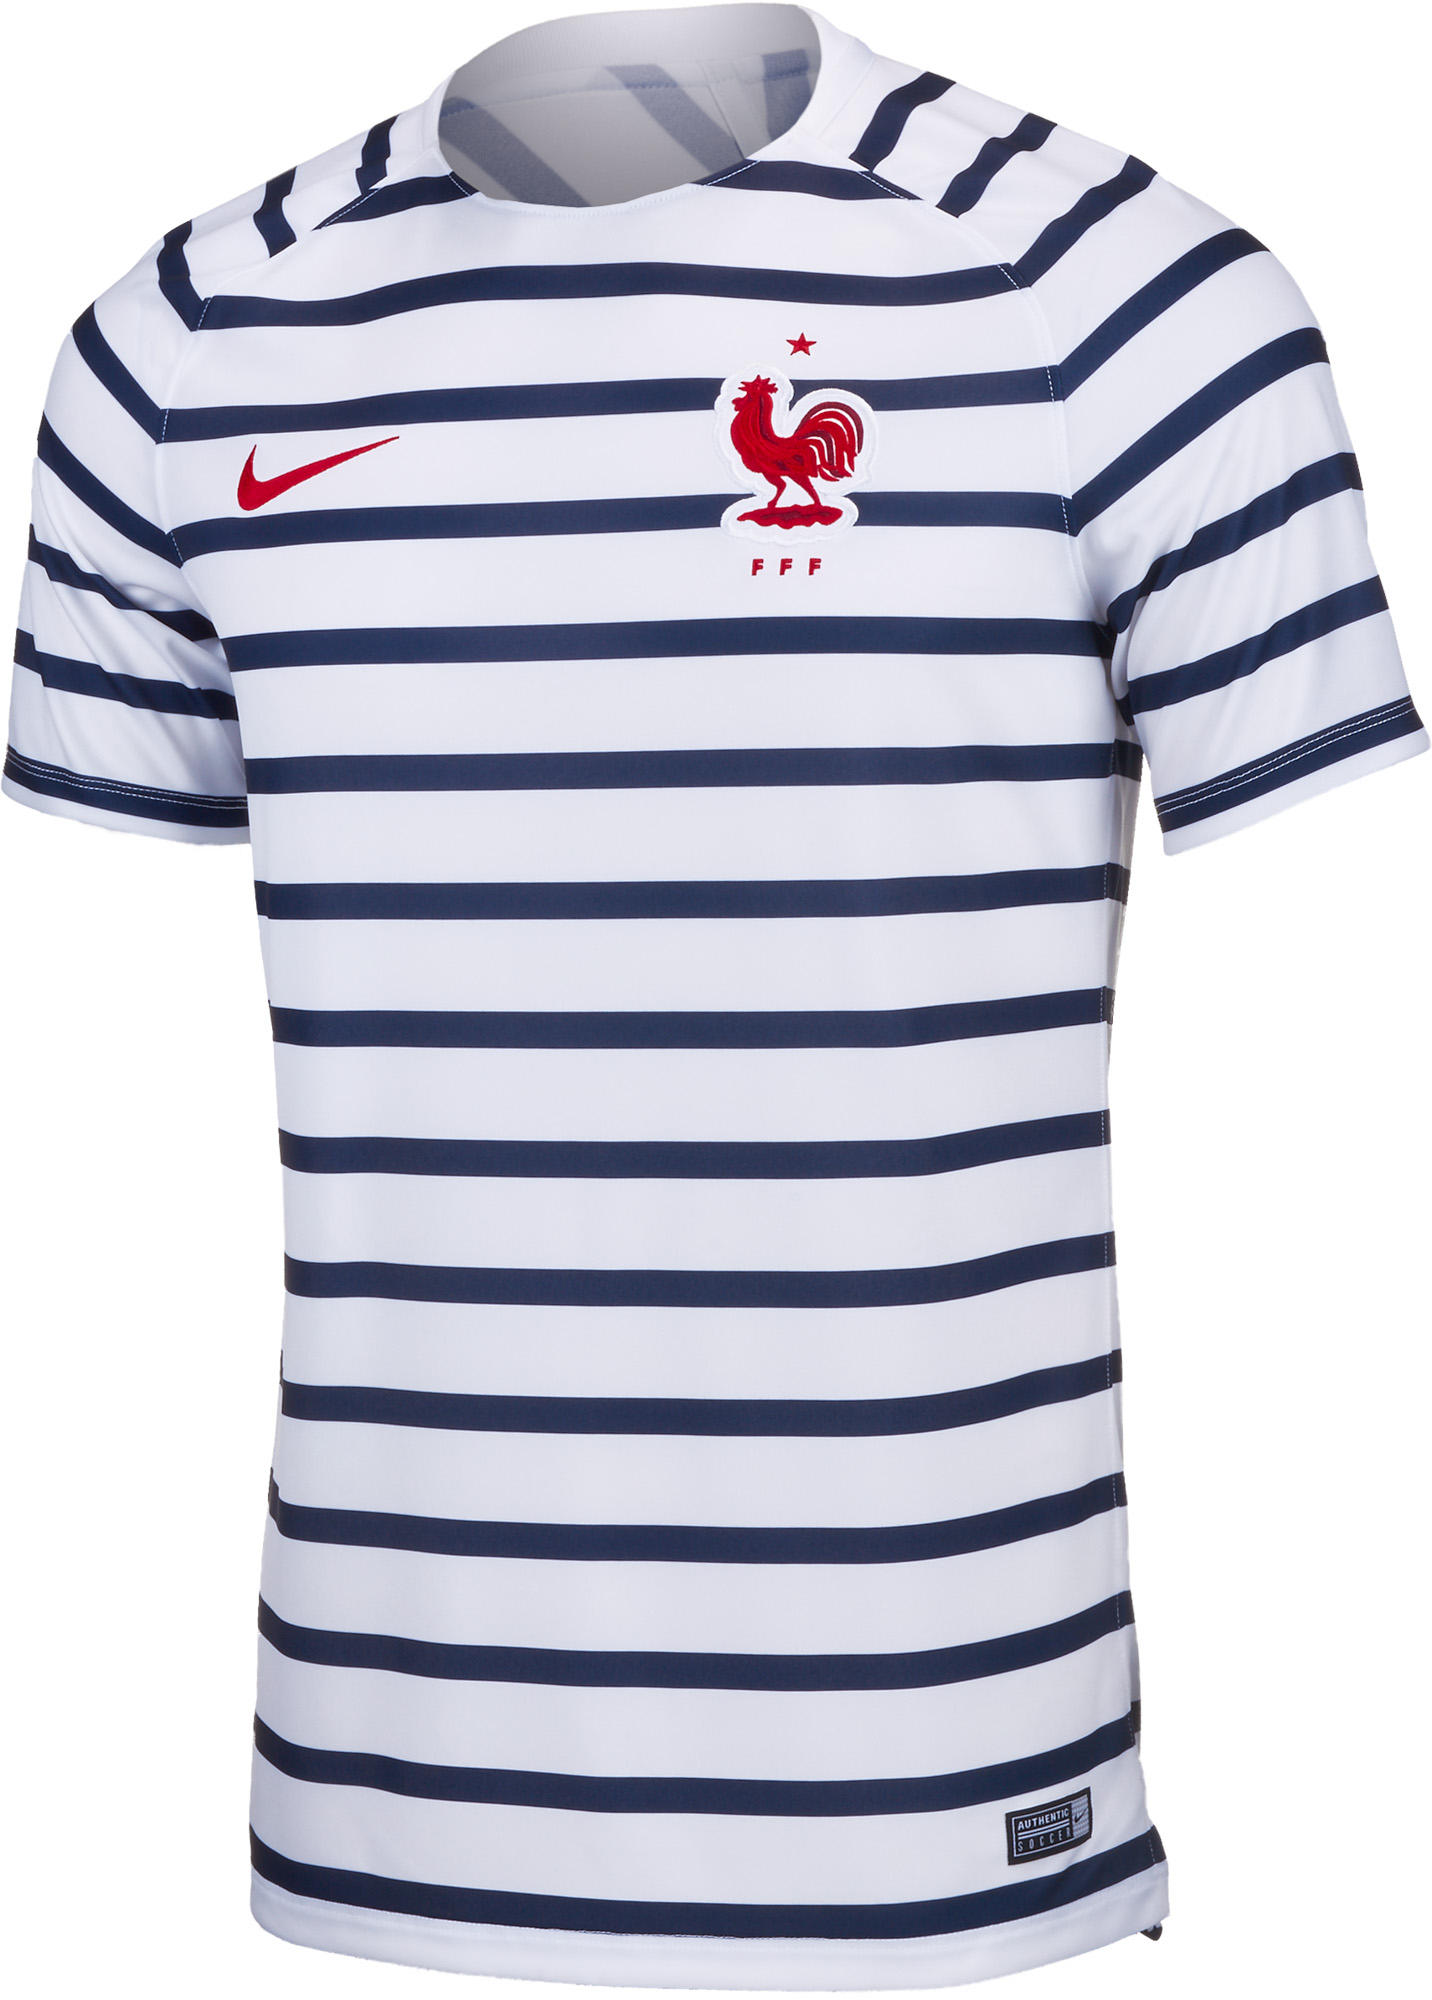 france youth soccer jersey